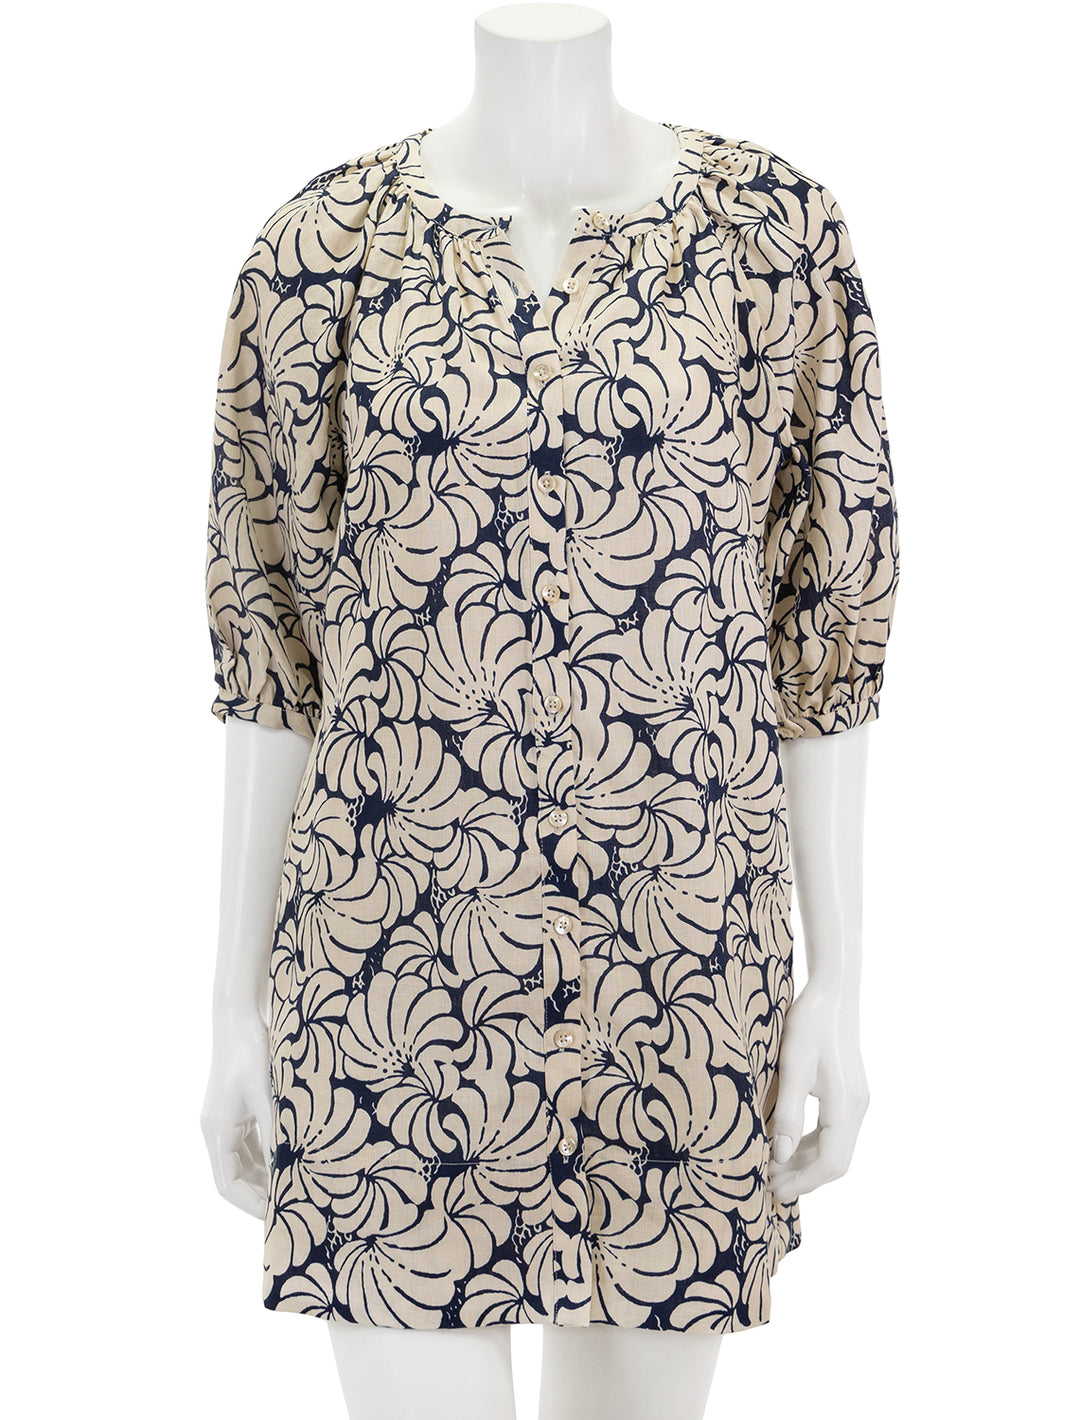 Front view of STAUD's mini vincent dress in navy scallop block print.